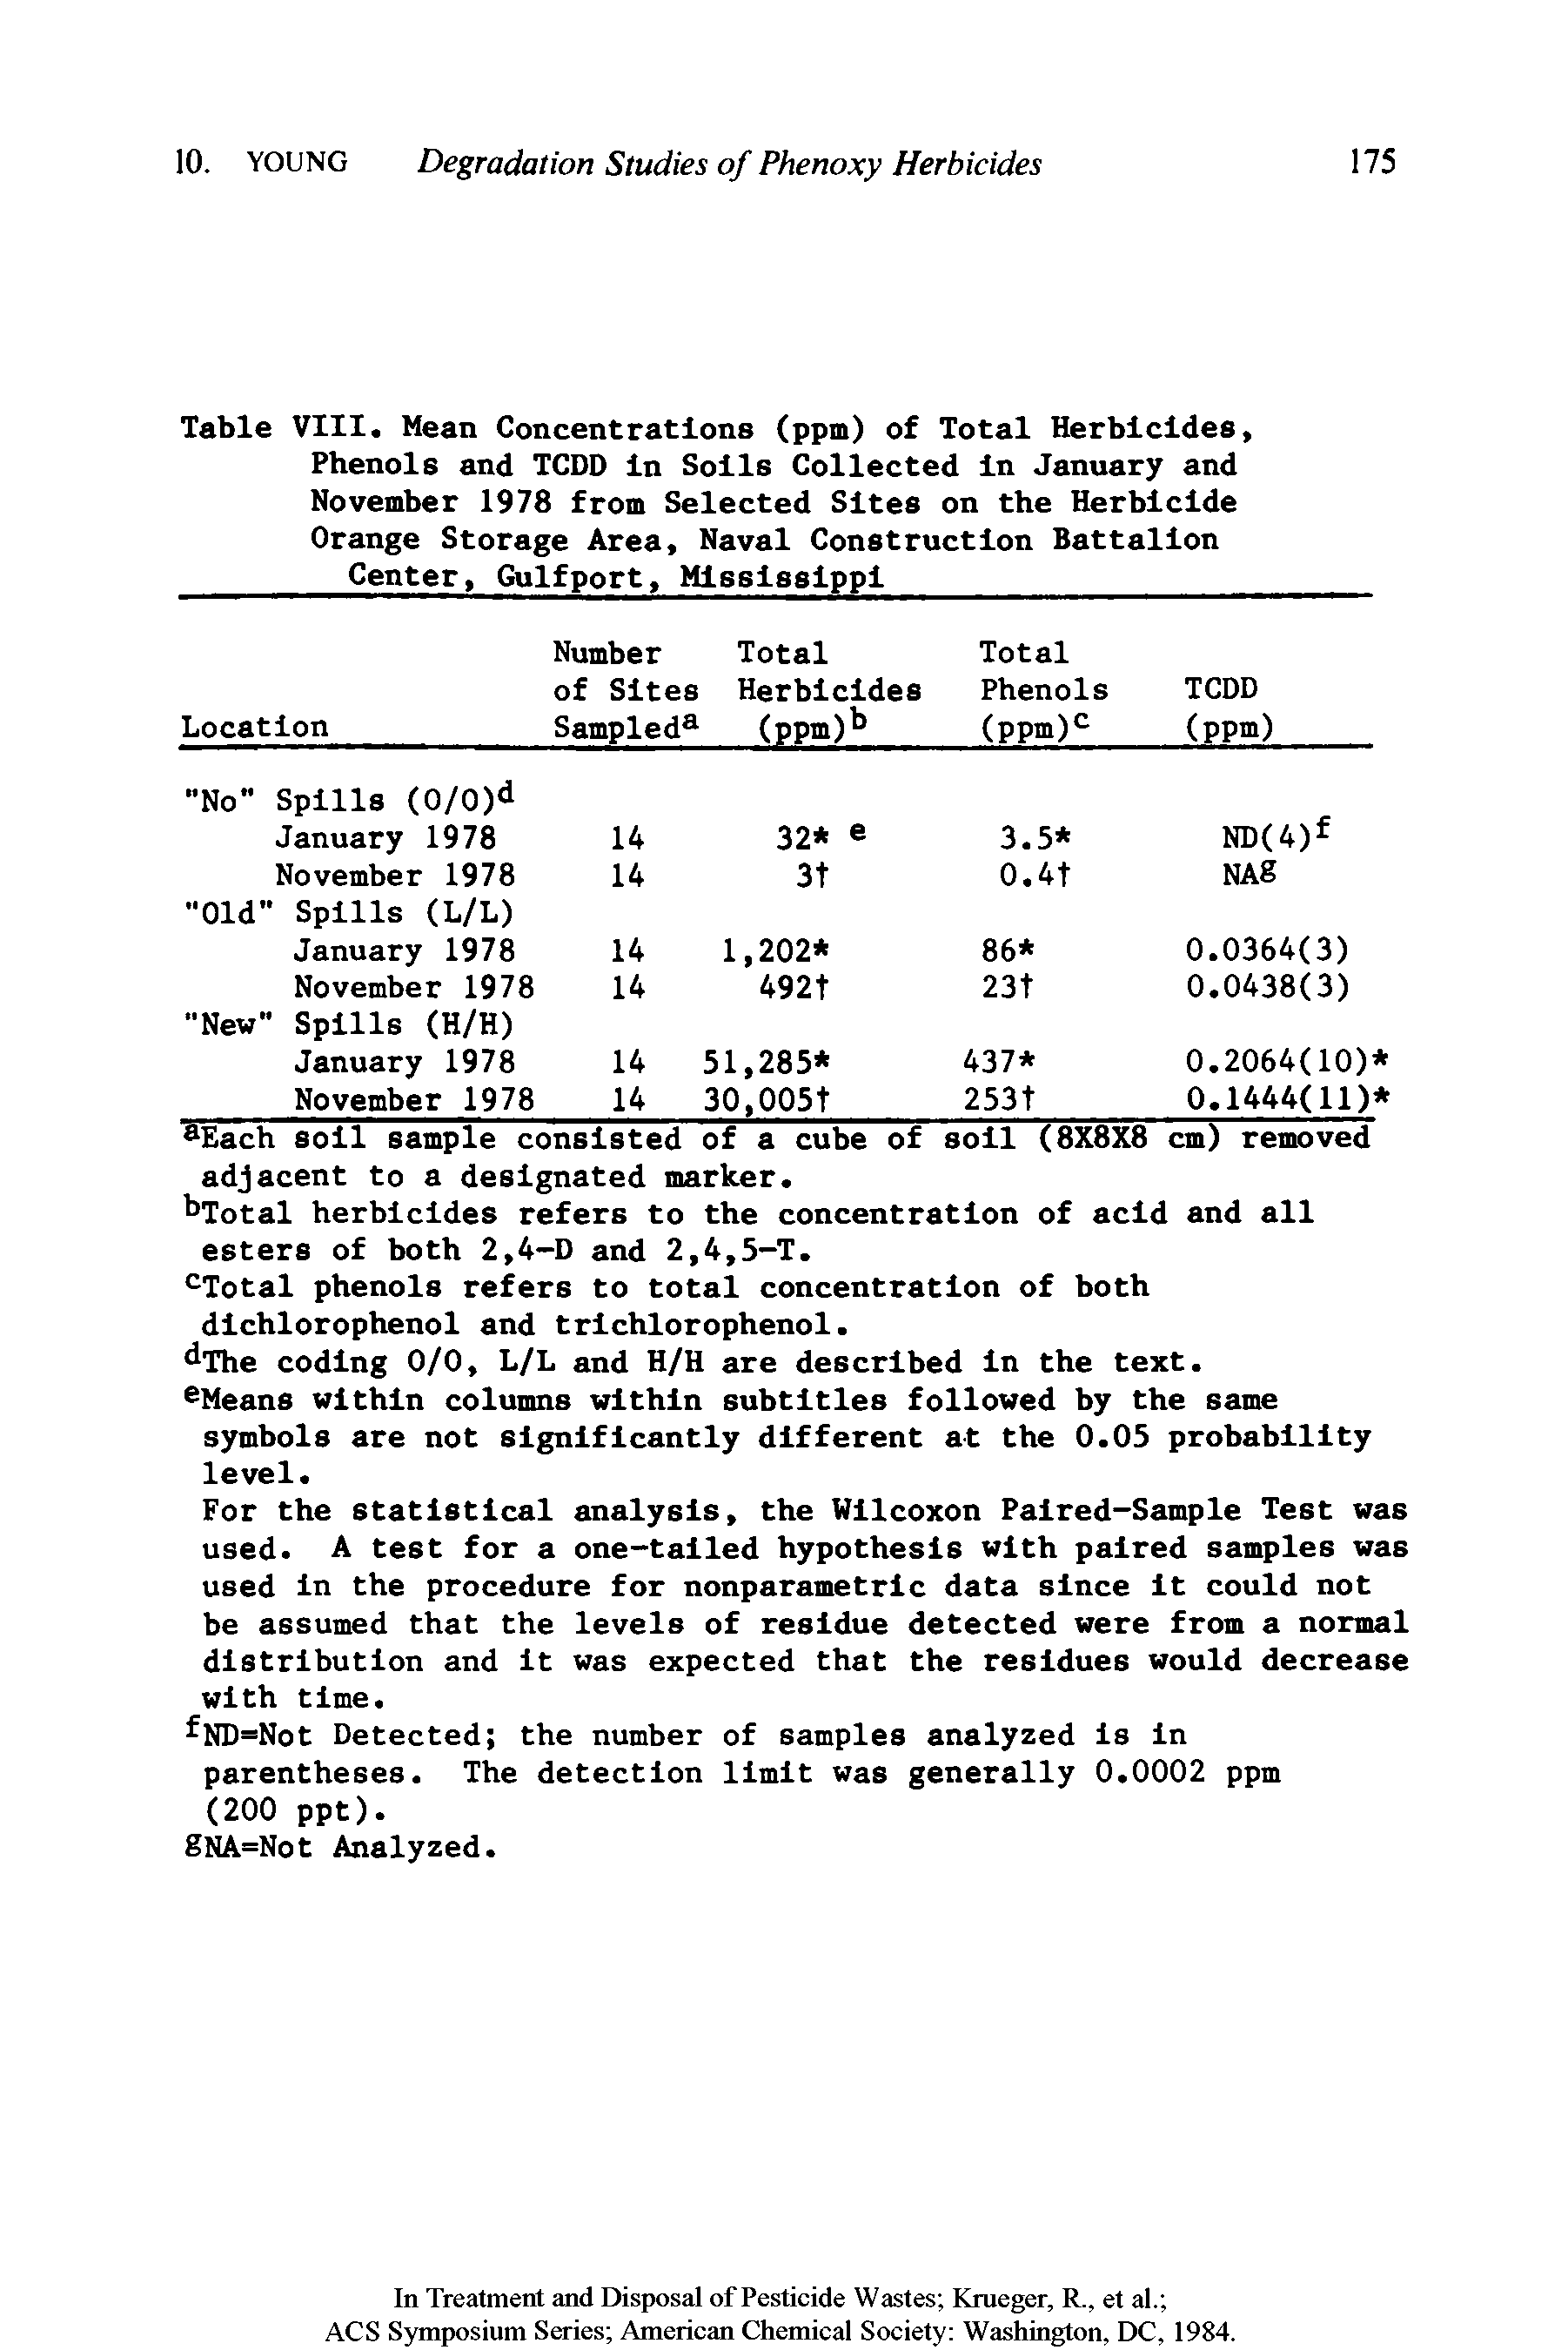 Table VIII. Mean Concentrations (ppm) of Total Herbicides, Phenols and TCDD In Soils Collected In January and November 1978 from Selected Sites on the Herbicide Orange Storage Area, Naval Construction Battalion...